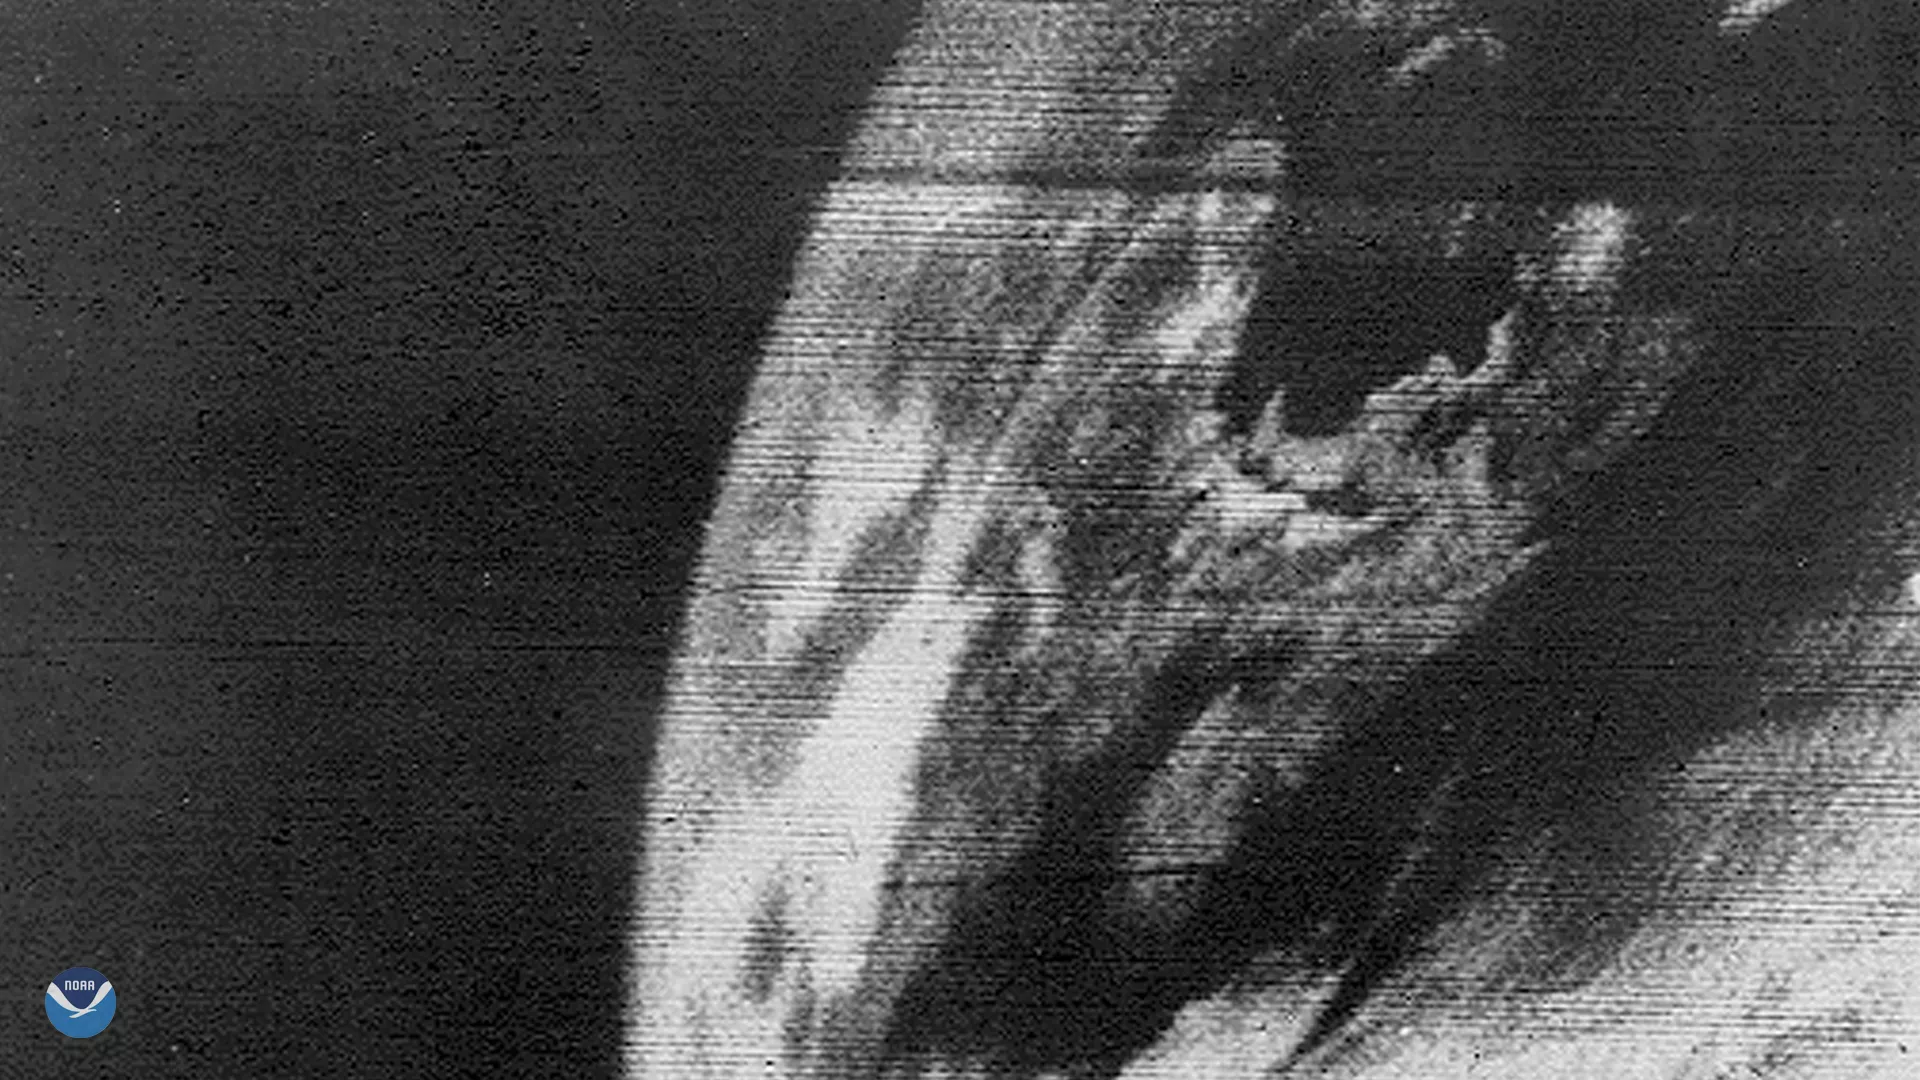 First-ever satellite imagery from TIROS-1 satellite from April 1, 1960.